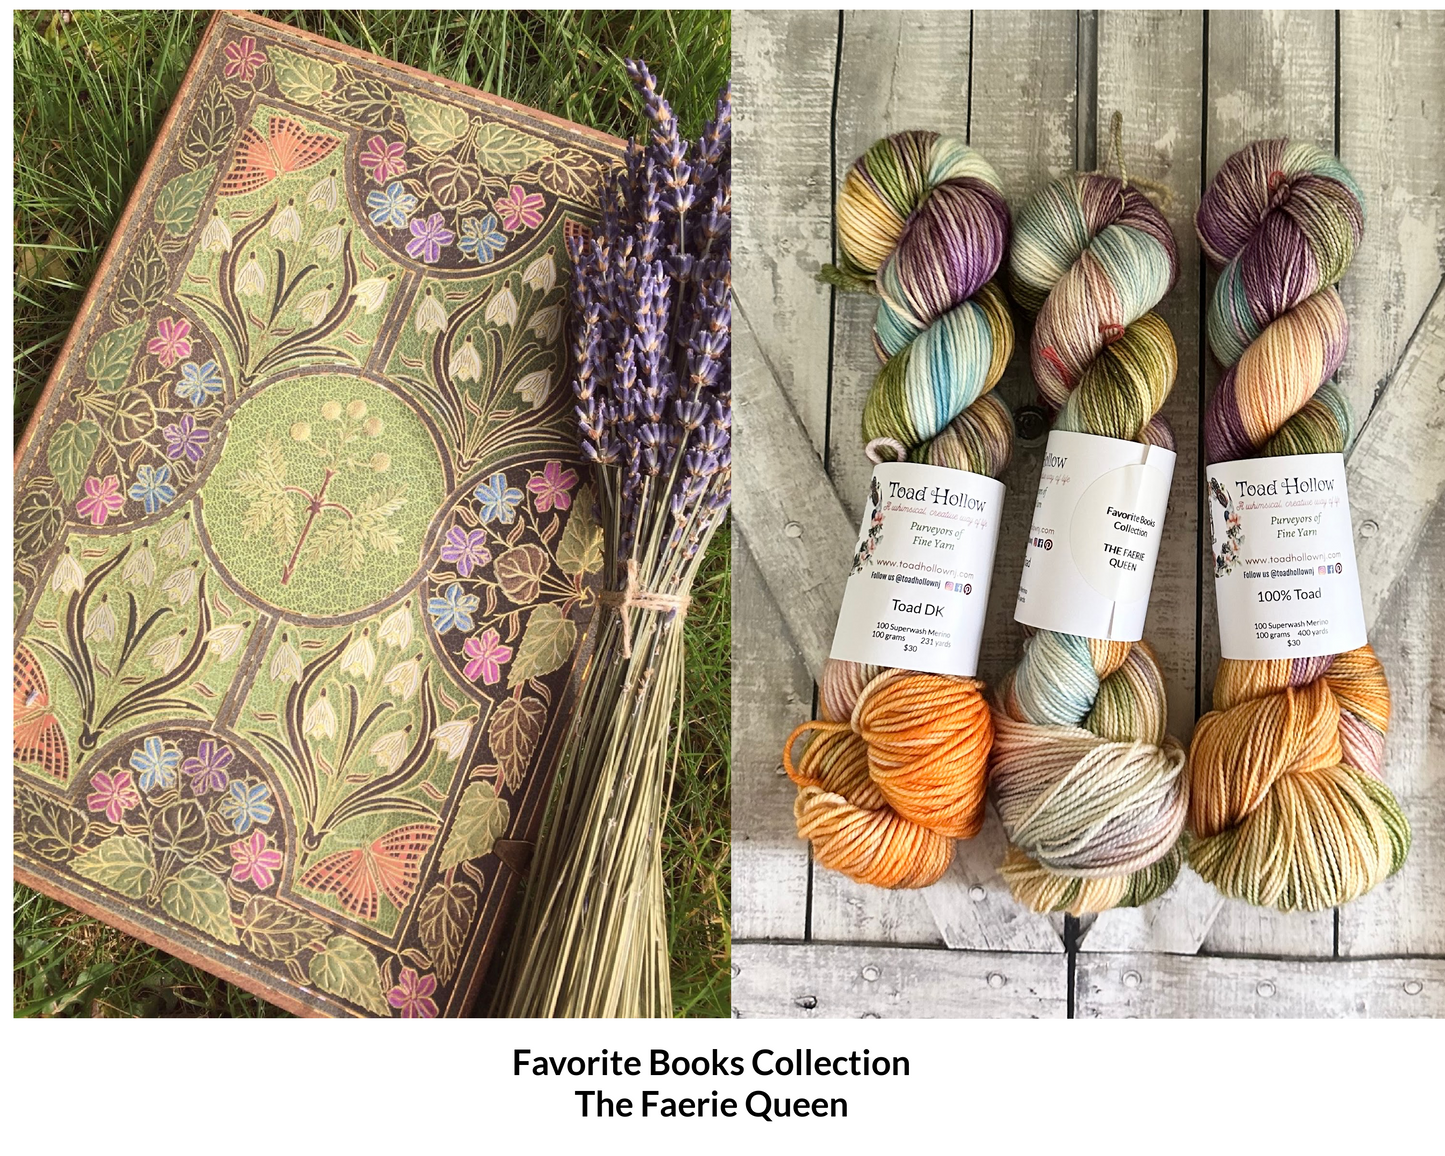 The Faerie Queen - APRIL FAVORITE BOOKS MONTHLY YARN CLUB, Hand Dyed Superwash Merino Yarn,Toad Hollow Yarns